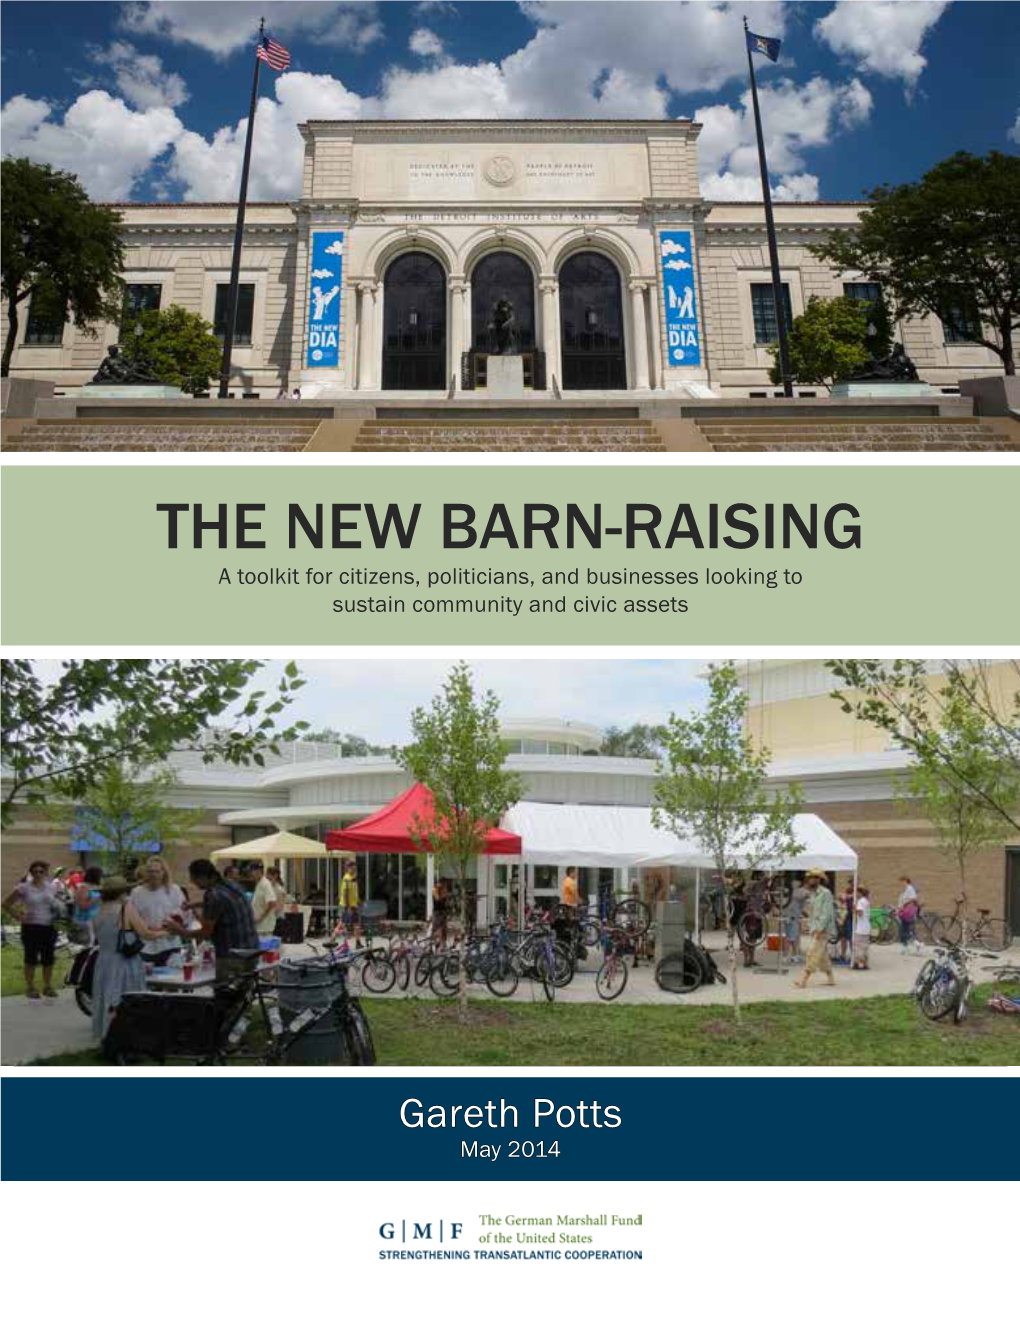 THE NEW BARN-RAISING a Toolkit for Citizens, Politicians, and Businesses Looking to Sustain Community and Civic Assets